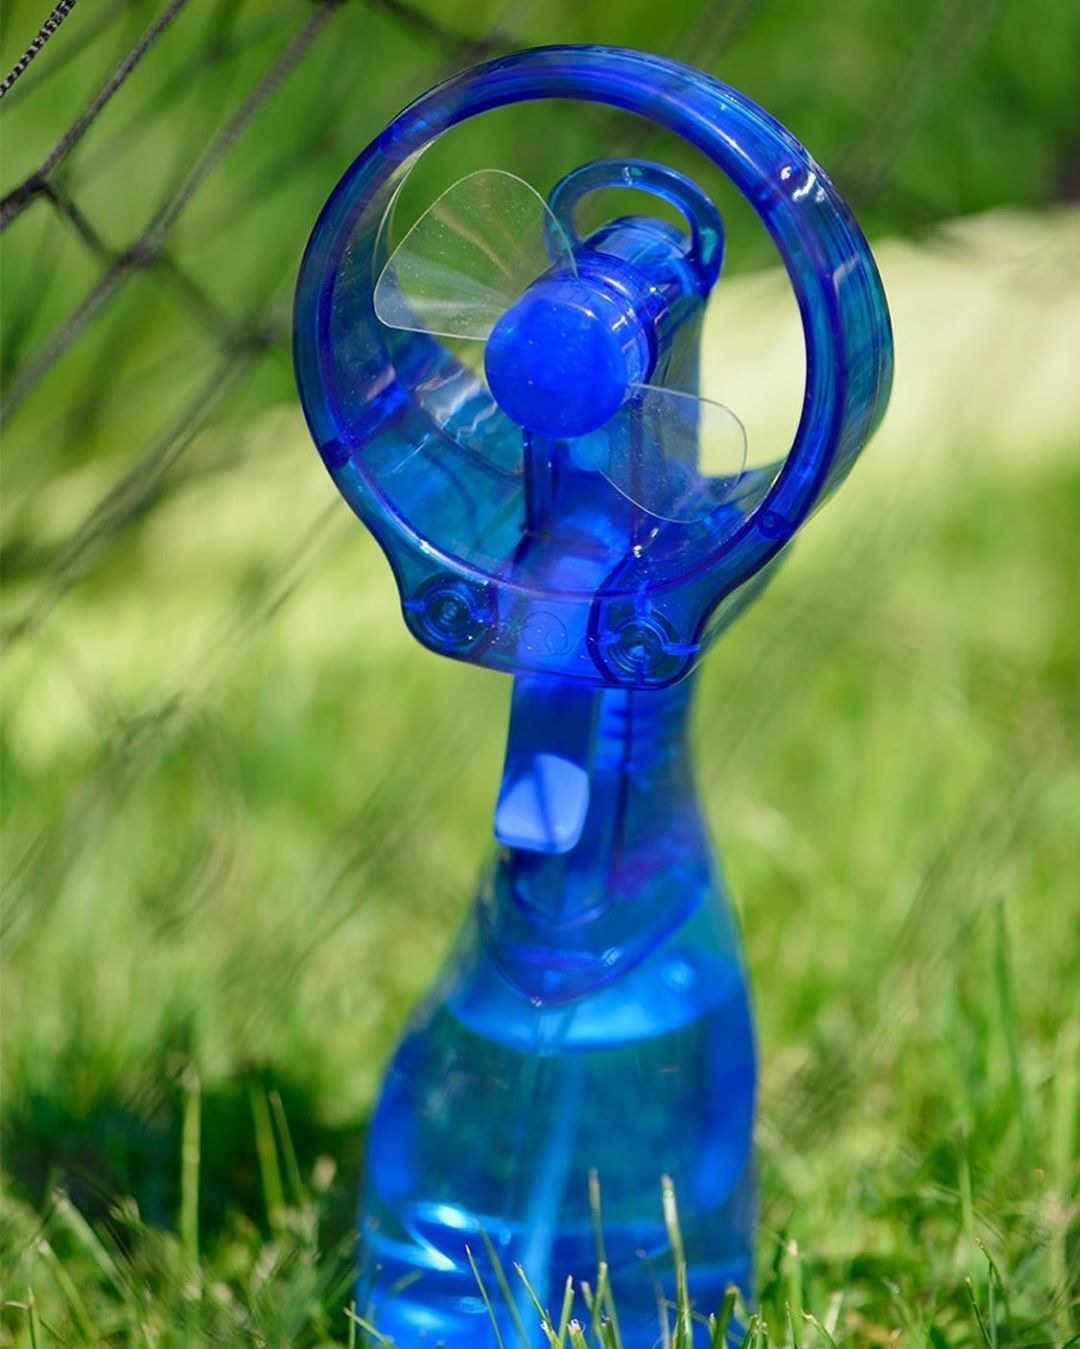 A bottle filled with water with a fan attachment is placed upright on grass